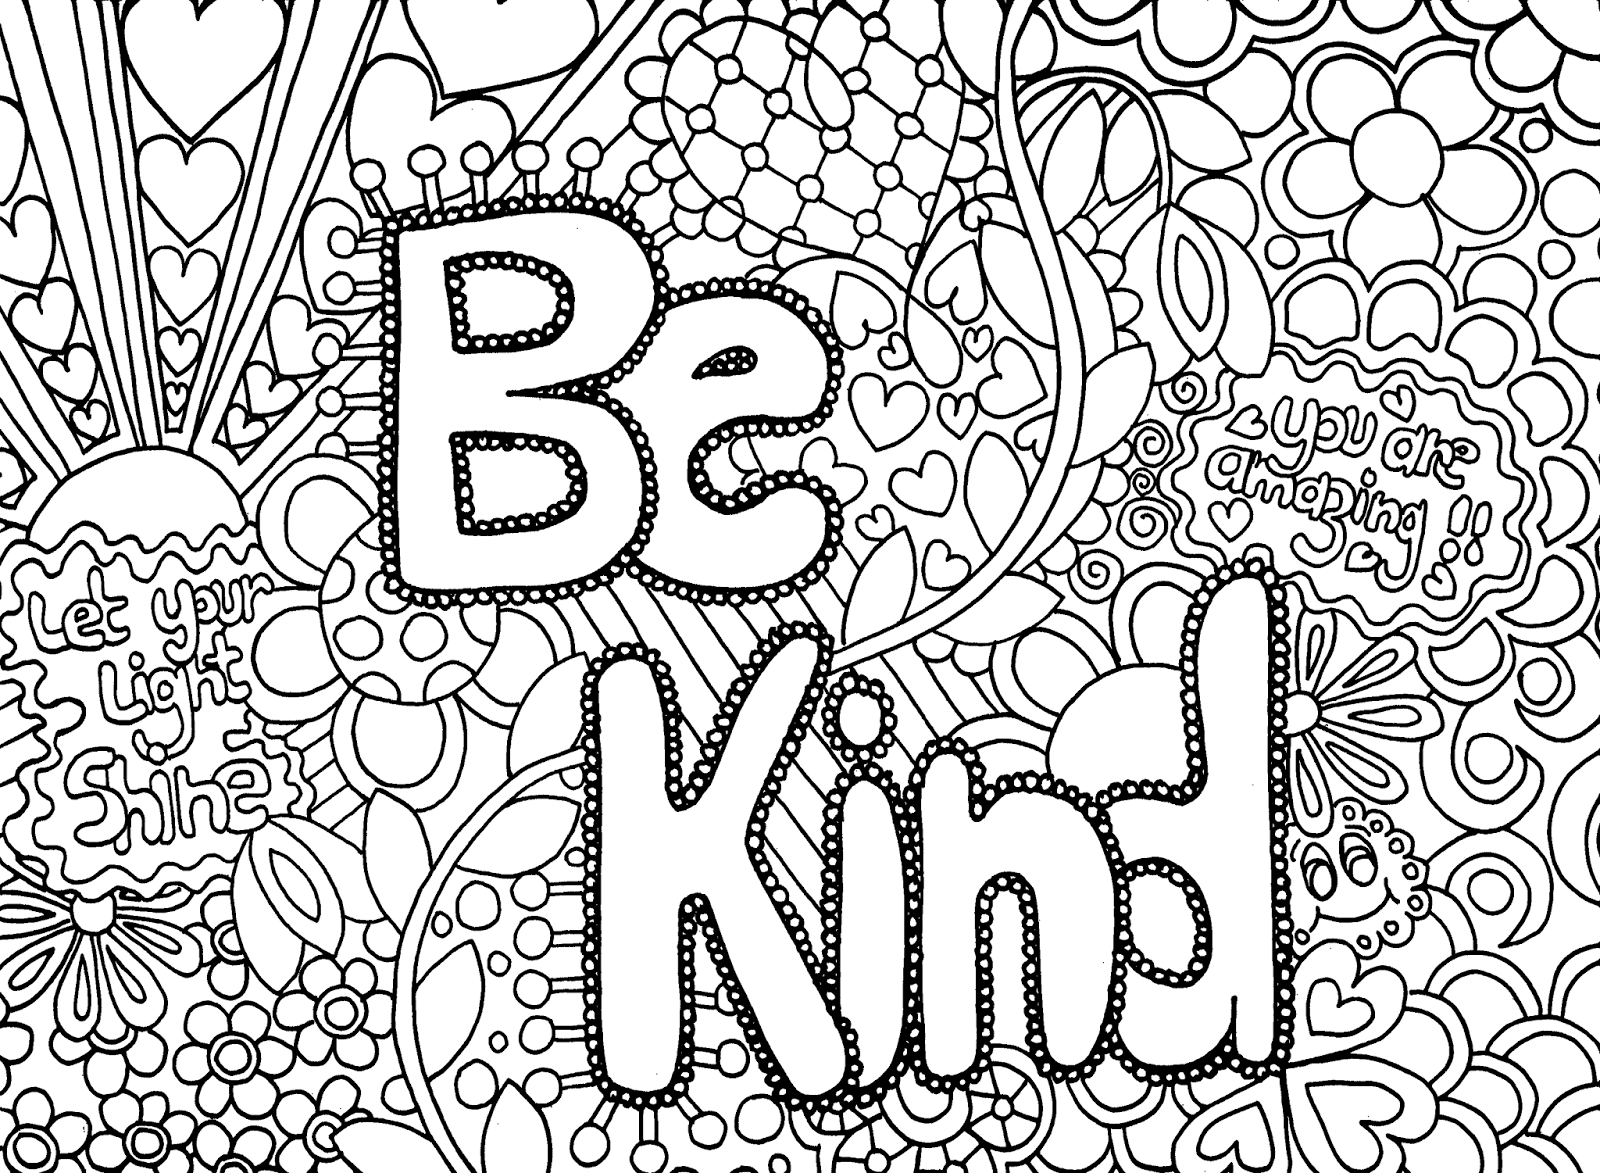 Difficult-coloring-pages-for-teenagers